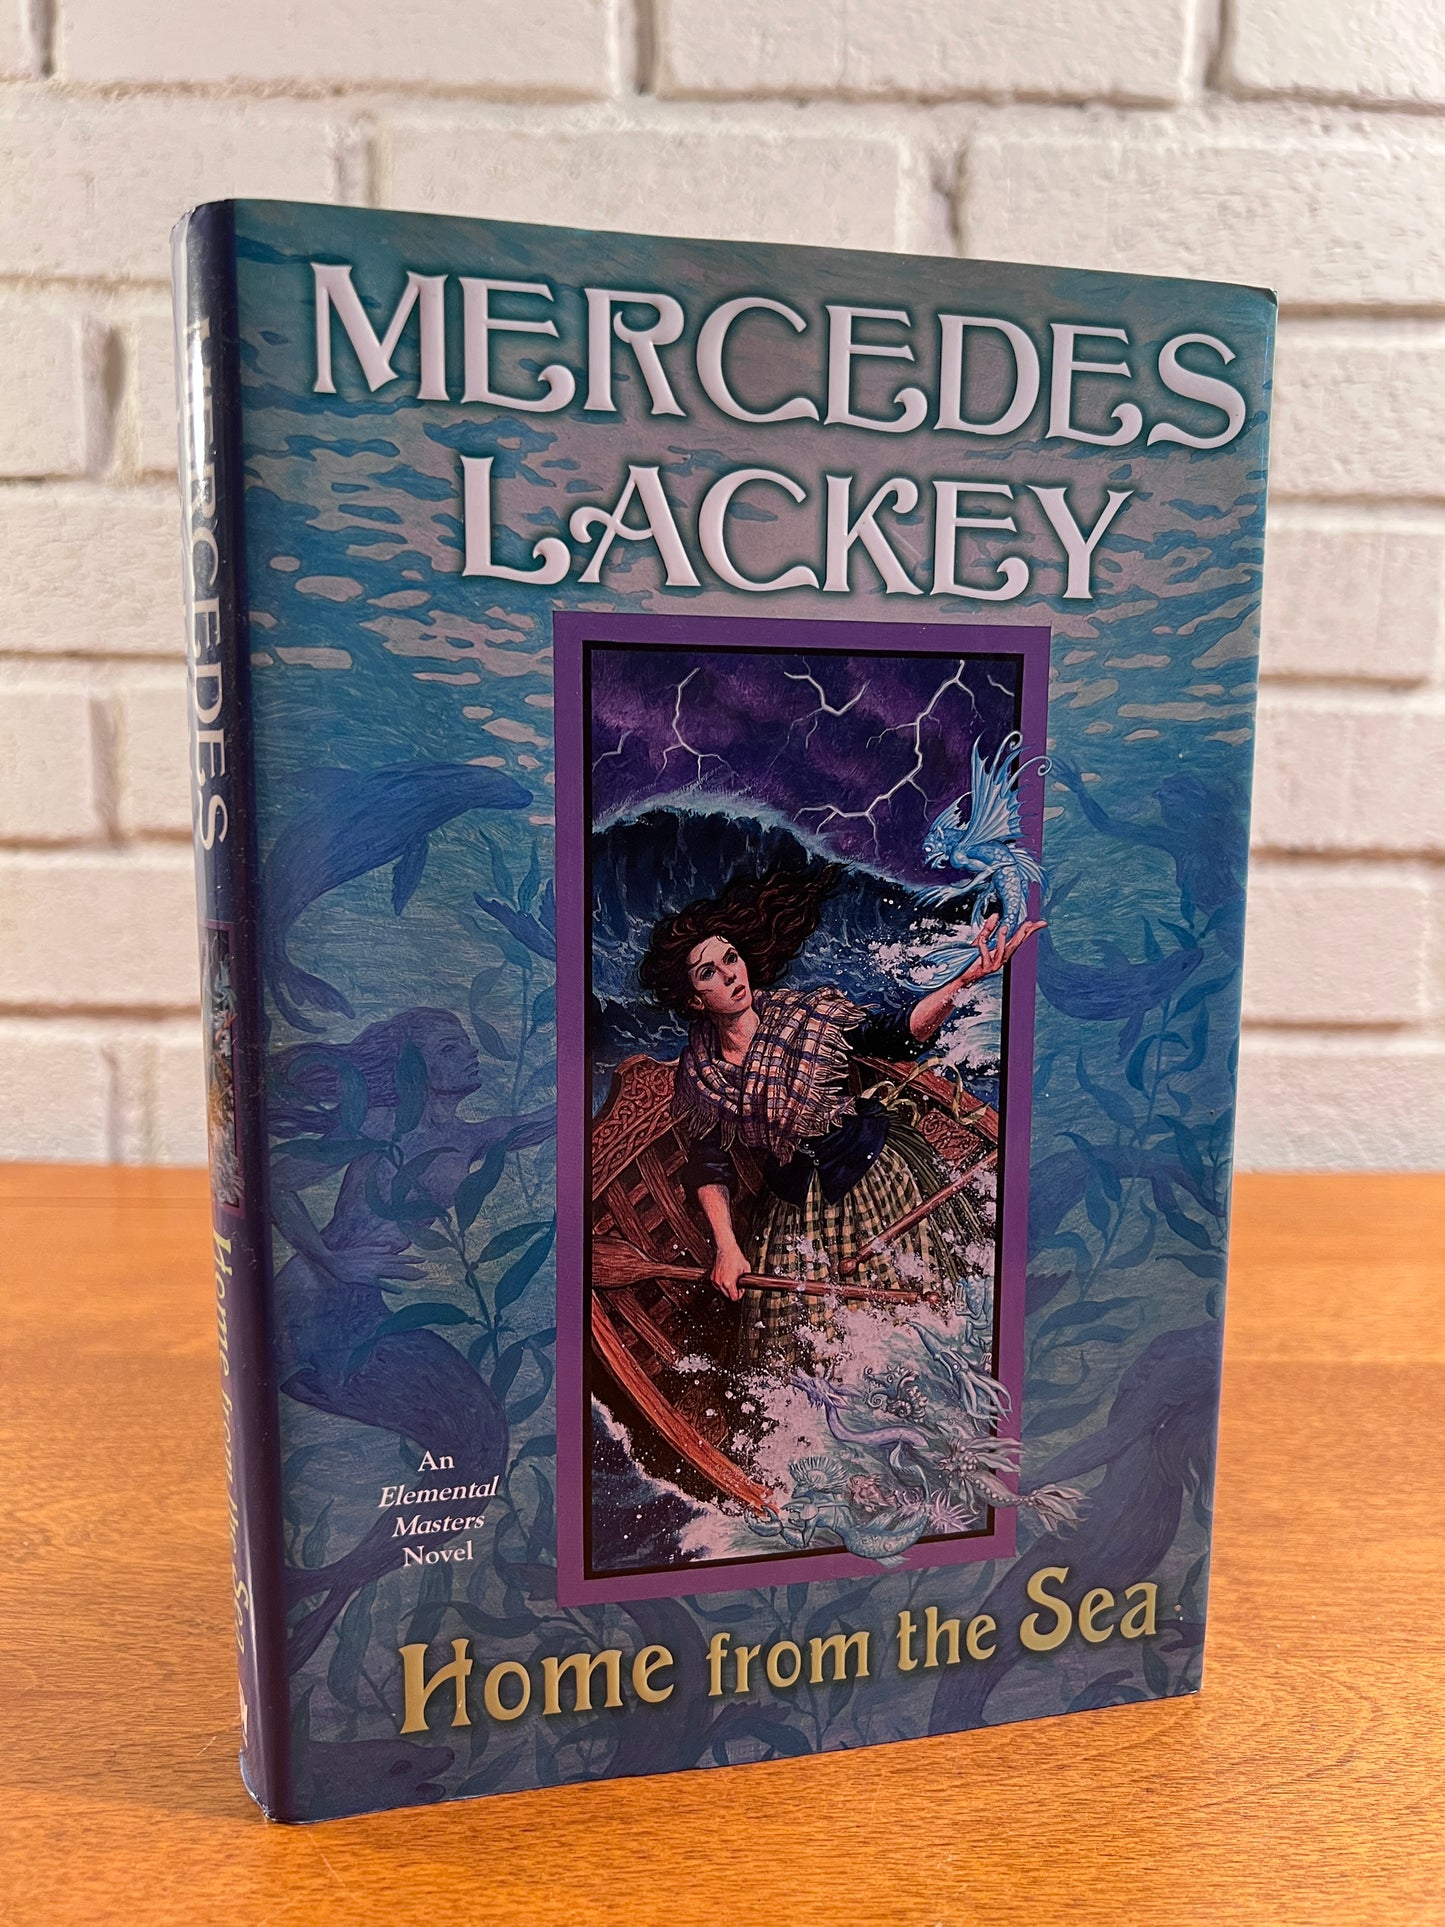 Home from the Sea by Mercedes Lackey